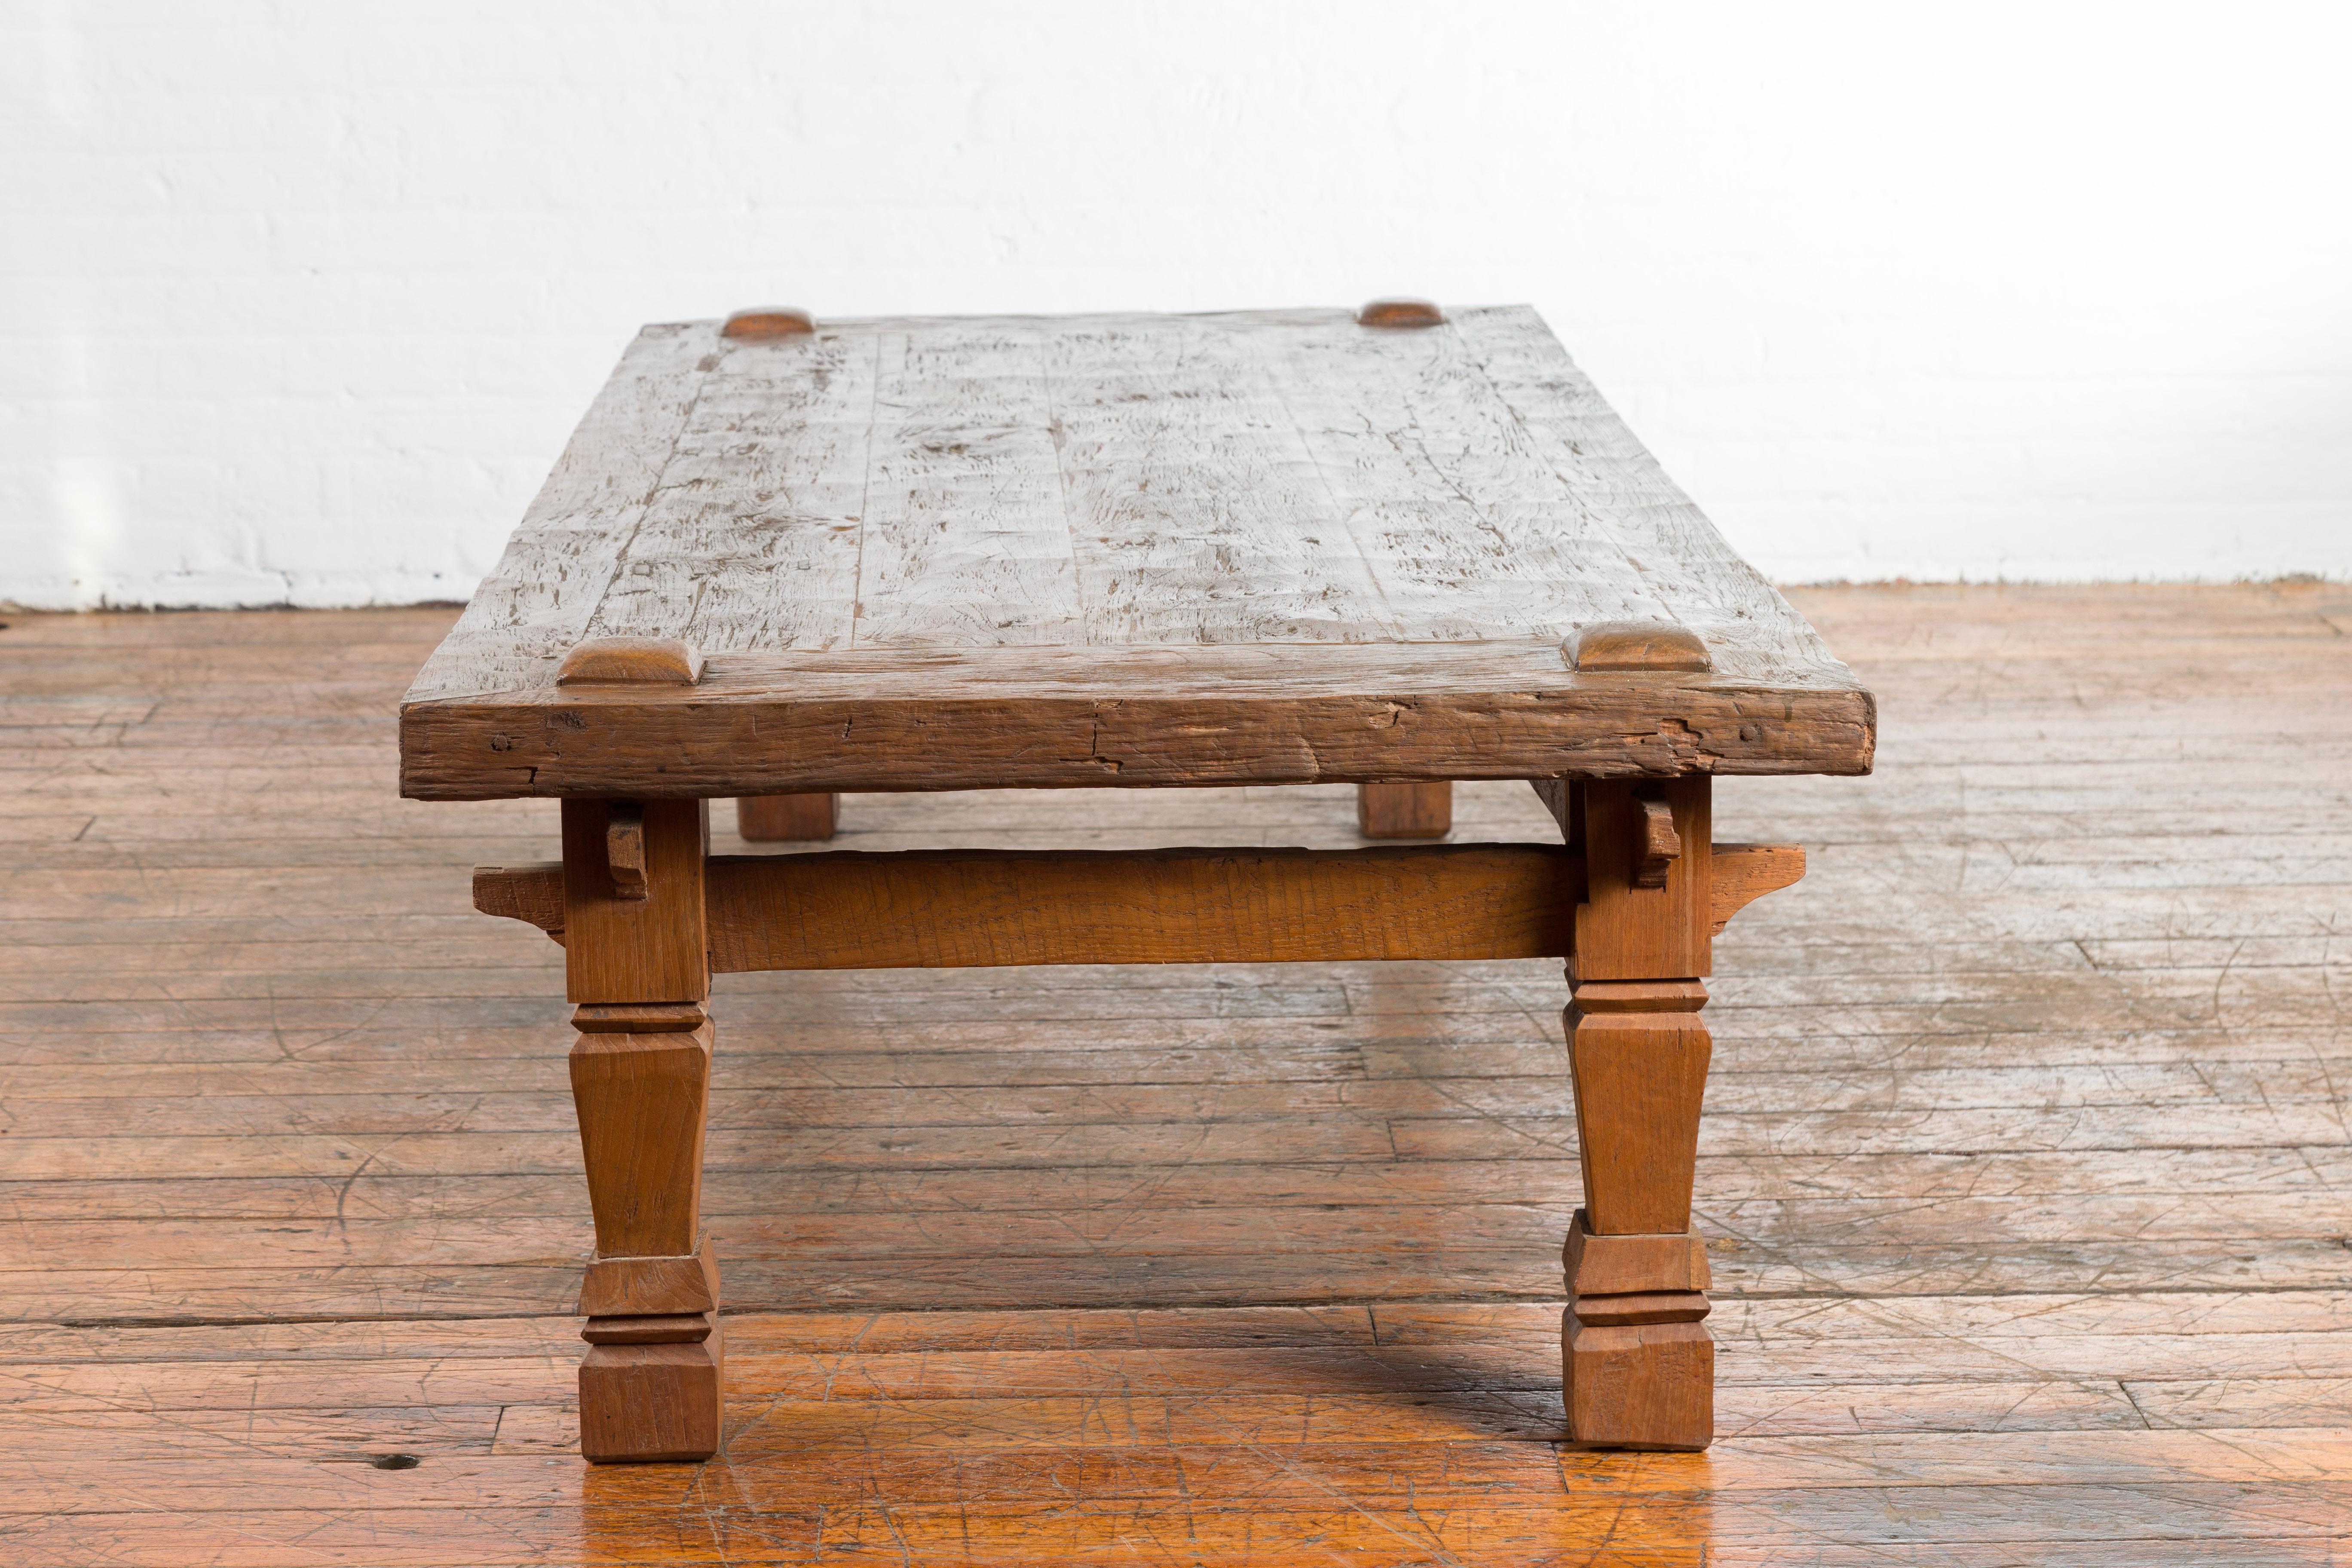 19th Century Indonesian Madurese Coffee Table with Carved Legs and Raised Joints For Sale 6